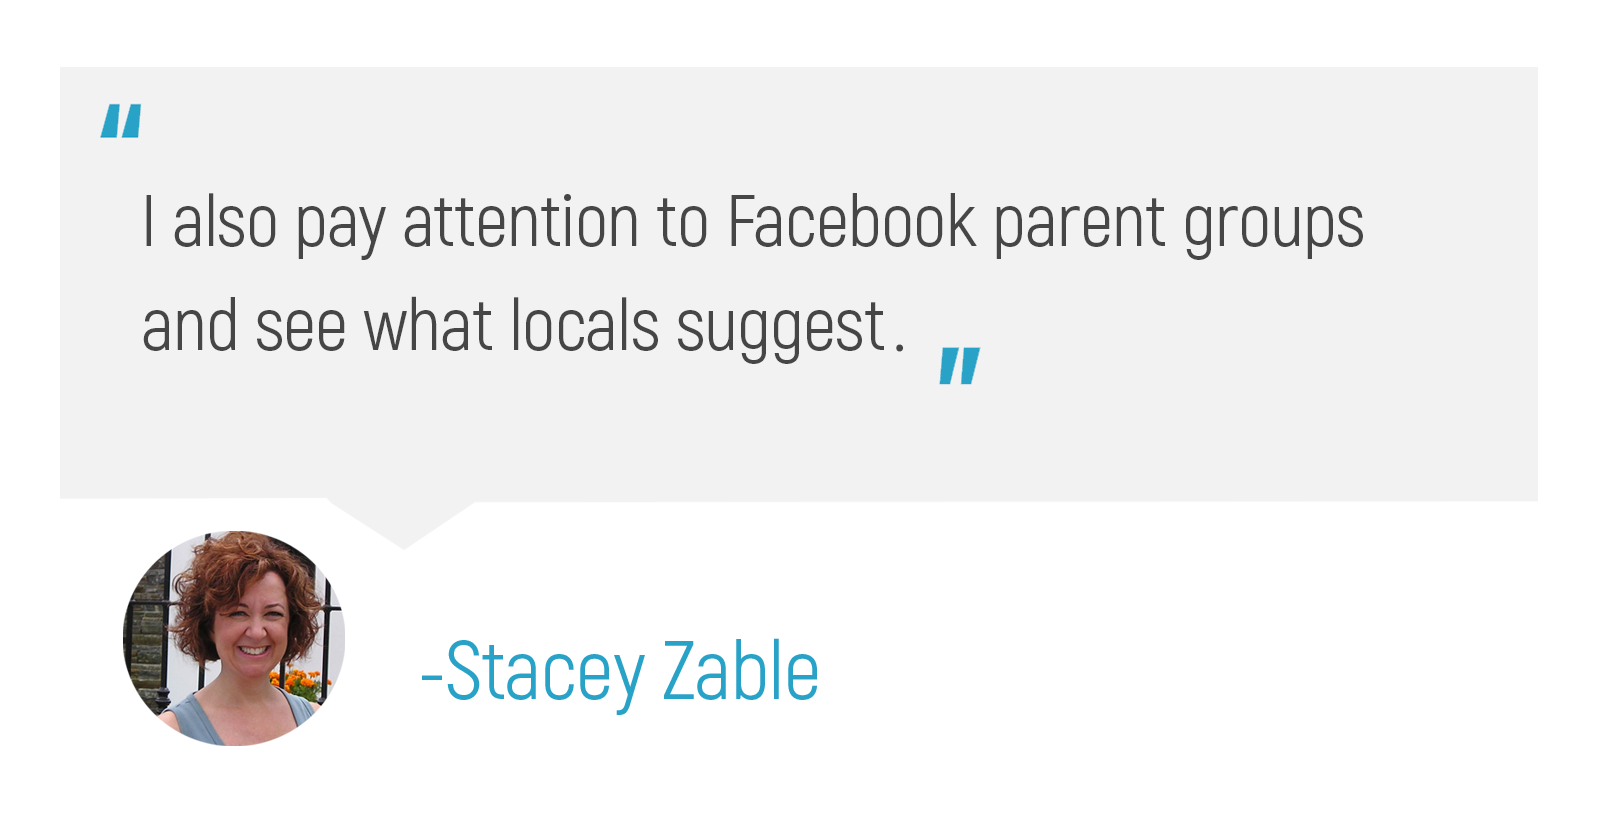 "I also pay attention to Facebook parent groups and see what locals suggest."